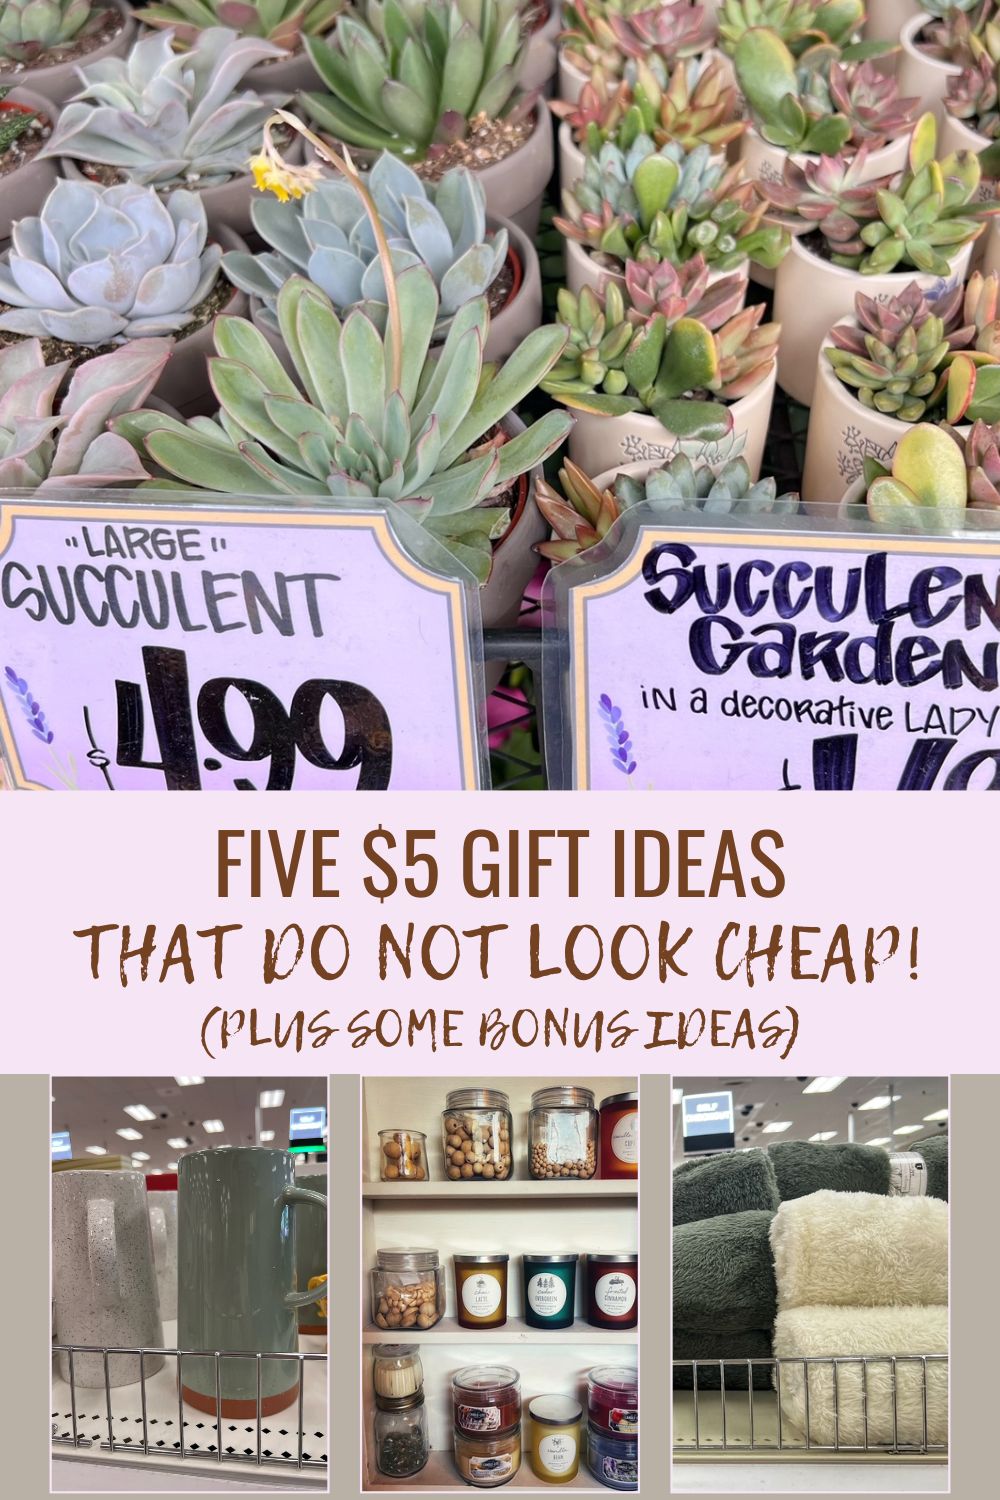 Five Gifts Under $5 That Are Perfect for Gifting!